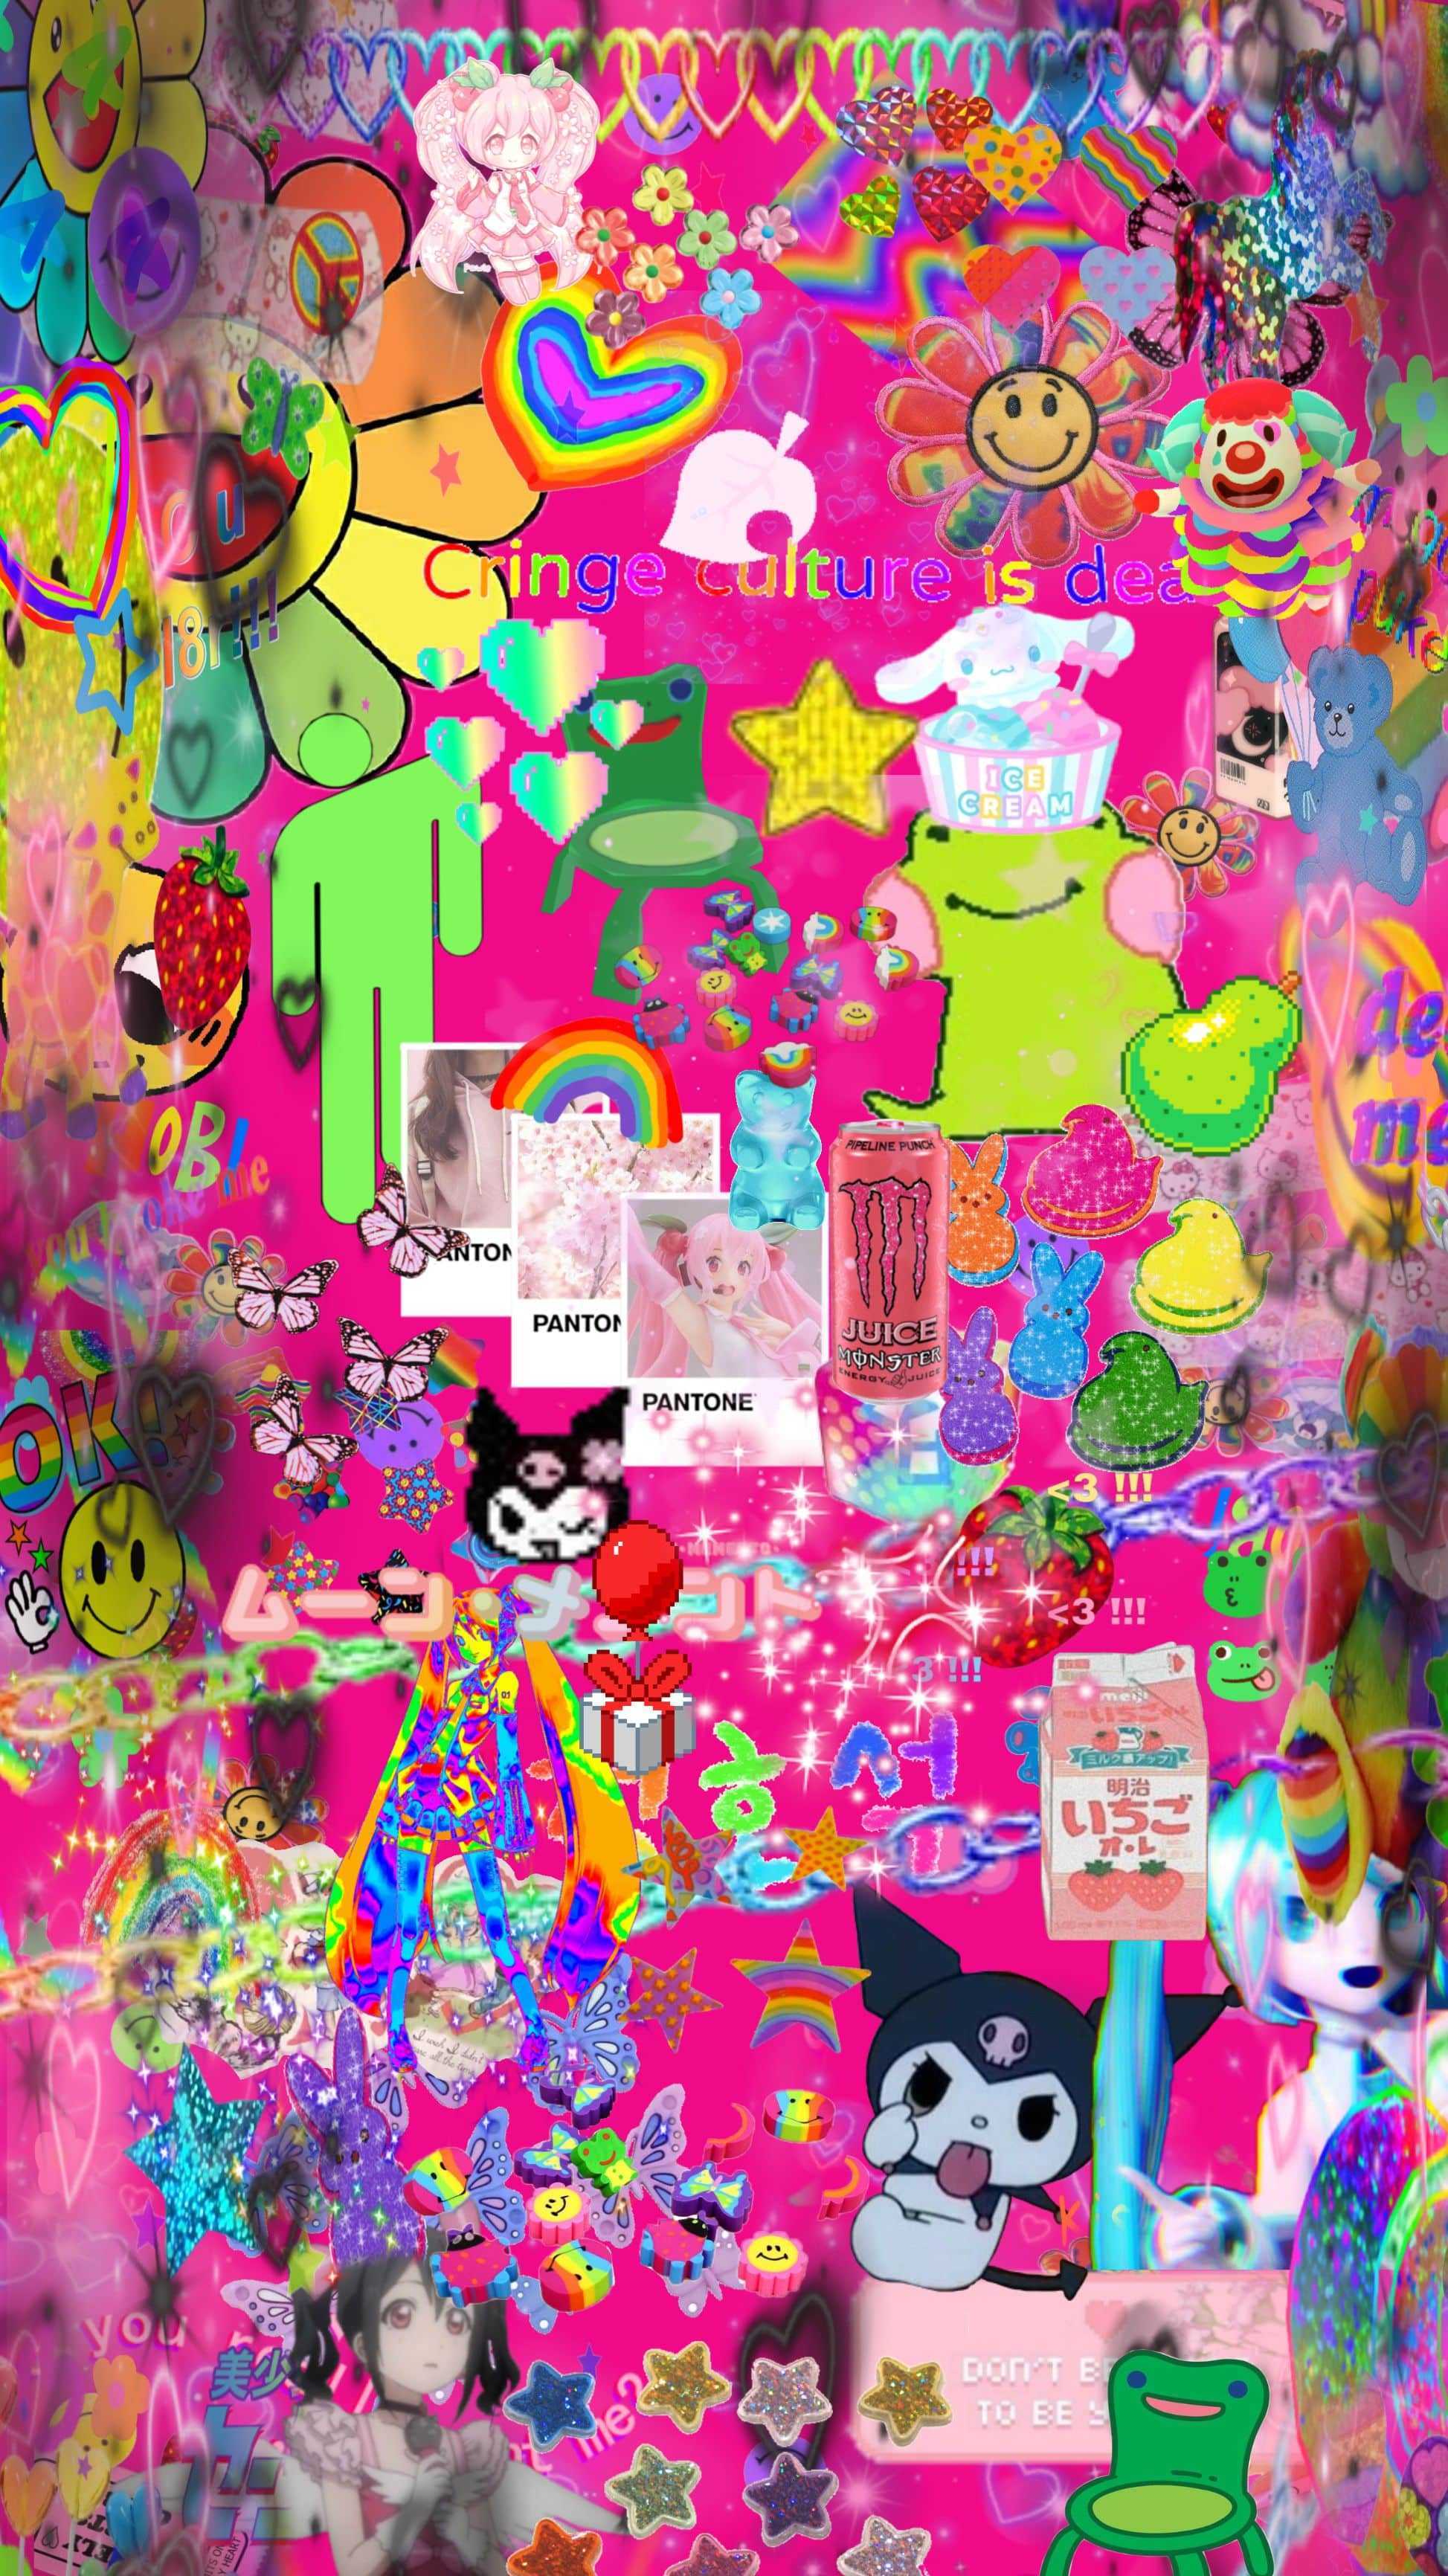 A pink collage with many different images such as a girl, a star, a bottle, a cat, a butterfly, a snake, a heart, a candy, a fish, a shoe, a toy, a toothbrush, a cup, a handbag, a bag, a bag of chips, a phone, a bottle of juice, a cake, a girl with long hair, a girl with a ponytail, a girl with a headband, a girl with a bow, a girl with a hair clip, a girl with a hair tie, a girl with a headband, a girl with a bow, a girl with a hair clip, a girl with a headband, a girl with a bow, a girl with a hair clip, a girl with a headband, a girl with a bow, a girl with a hair clip, a girl with a headband, a girl with a bow, a girl with a hair clip, a girl with a headband, a girl with a bow, a girl with a hair clip, a girl with a headband, a girl with a bow, a girl with a hair clip, a girl with a headband, a girl with a bow, a girl with a hair clip, a girl with a headband, a girl with a bow, a girl with a hair clip, a girl with a headband, a girl with a bow, a girl with a hair clip, a girl with a headband, a girl with a bow, a girl with a hair clip, a girl with a headband, a girl with a bow, a girl with a hair clip, a girl with a headband, a girl with a bow, a girl with a hair clip, a girl with a headband, a girl with a bow, a girl with a hair clip, a girl with a headband, a girl with a bow, a girl with a hair clip, a girl with a headband, a girl with a bow, a girl with a hair clip, a girl with a headband, a girl with a bow, a girl with a hair clip, a girl with a headband, a girl with a bow, a girl with a hair clip, a girl with a headband, a girl with a bow, a girl with a hair clip, a girl with a headband, a girl with a bow, a girl with a hair clip, a girl with a headband, a girl with a bow, a girl with a hair clip - Weirdcore